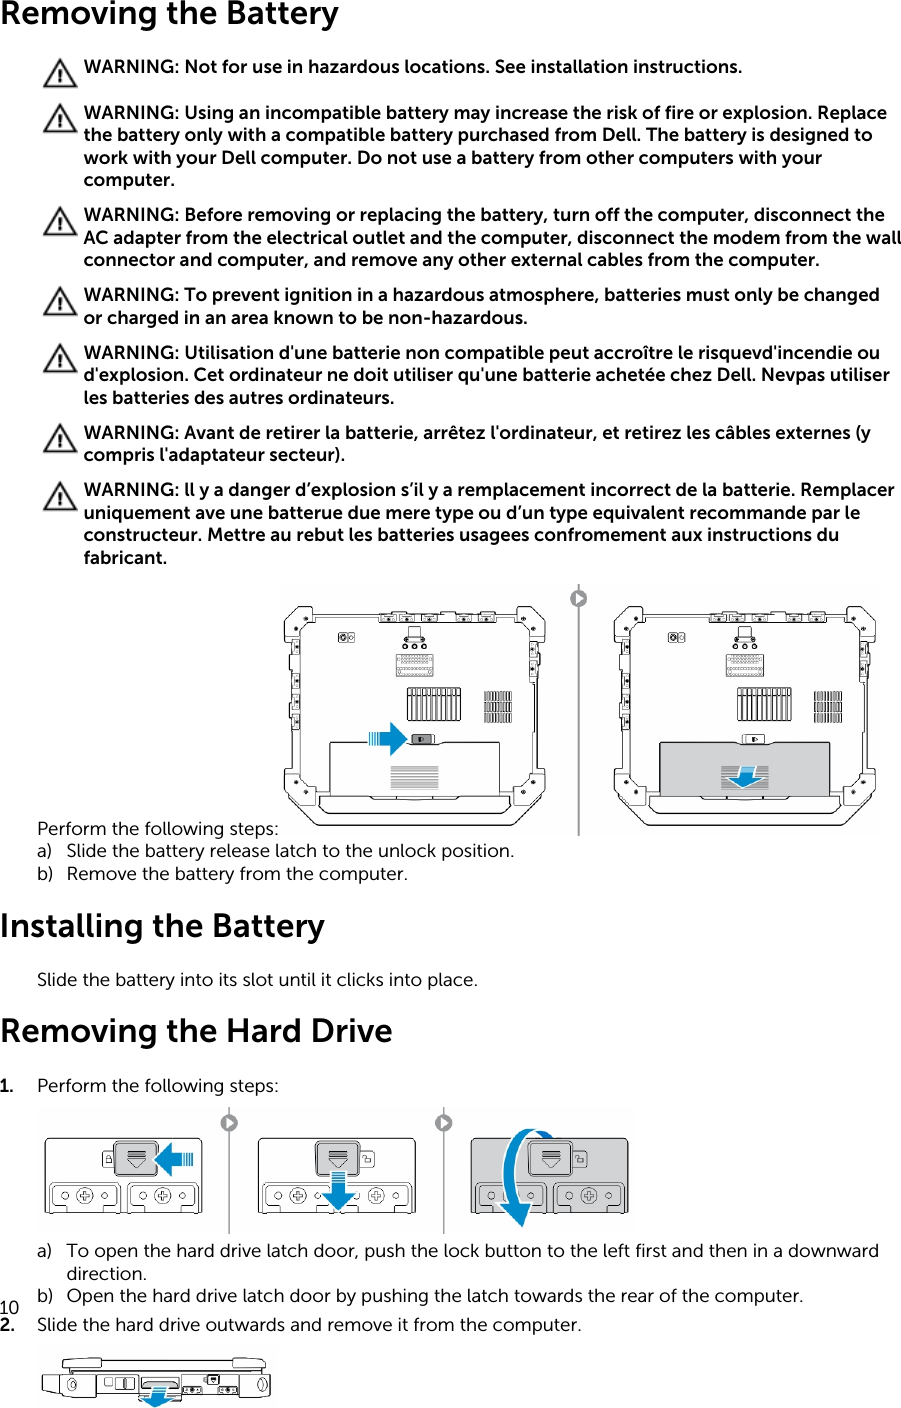 Removing the BatteryWARNING: Not for use in hazardous locations. See installation instructions.WARNING: Using an incompatible battery may increase the risk of fire or explosion. Replace the battery only with a compatible battery purchased from Dell. The battery is designed to work with your Dell computer. Do not use a battery from other computers with your computer.WARNING: Before removing or replacing the battery, turn off the computer, disconnect the AC adapter from the electrical outlet and the computer, disconnect the modem from the wall connector and computer, and remove any other external cables from the computer.WARNING: To prevent ignition in a hazardous atmosphere, batteries must only be changed or charged in an area known to be non-hazardous.WARNING: Utilisation d&apos;une batterie non compatible peut accroître le risquevd&apos;incendie ou d&apos;explosion. Cet ordinateur ne doit utiliser qu&apos;une batterie achetée chez Dell. Nevpas utiliser les batteries des autres ordinateurs.WARNING: Avant de retirer la batterie, arrêtez l&apos;ordinateur, et retirez les câbles externes (y compris l&apos;adaptateur secteur).WARNING: ll y a danger d’explosion s’il y a remplacement incorrect de la batterie. Remplacer uniquement ave une batterue due mere type ou d’un type equivalent recommande par le constructeur. Mettre au rebut les batteries usagees confromement aux instructions du fabricant.Perform the following steps:a) Slide the battery release latch to the unlock position.b) Remove the battery from the computer.Installing the BatterySlide the battery into its slot until it clicks into place.Removing the Hard Drive1. Perform the following steps:a) To open the hard drive latch door, push the lock button to the left first and then in a downward direction.b) Open the hard drive latch door by pushing the latch towards the rear of the computer.2. Slide the hard drive outwards and remove it from the computer.10